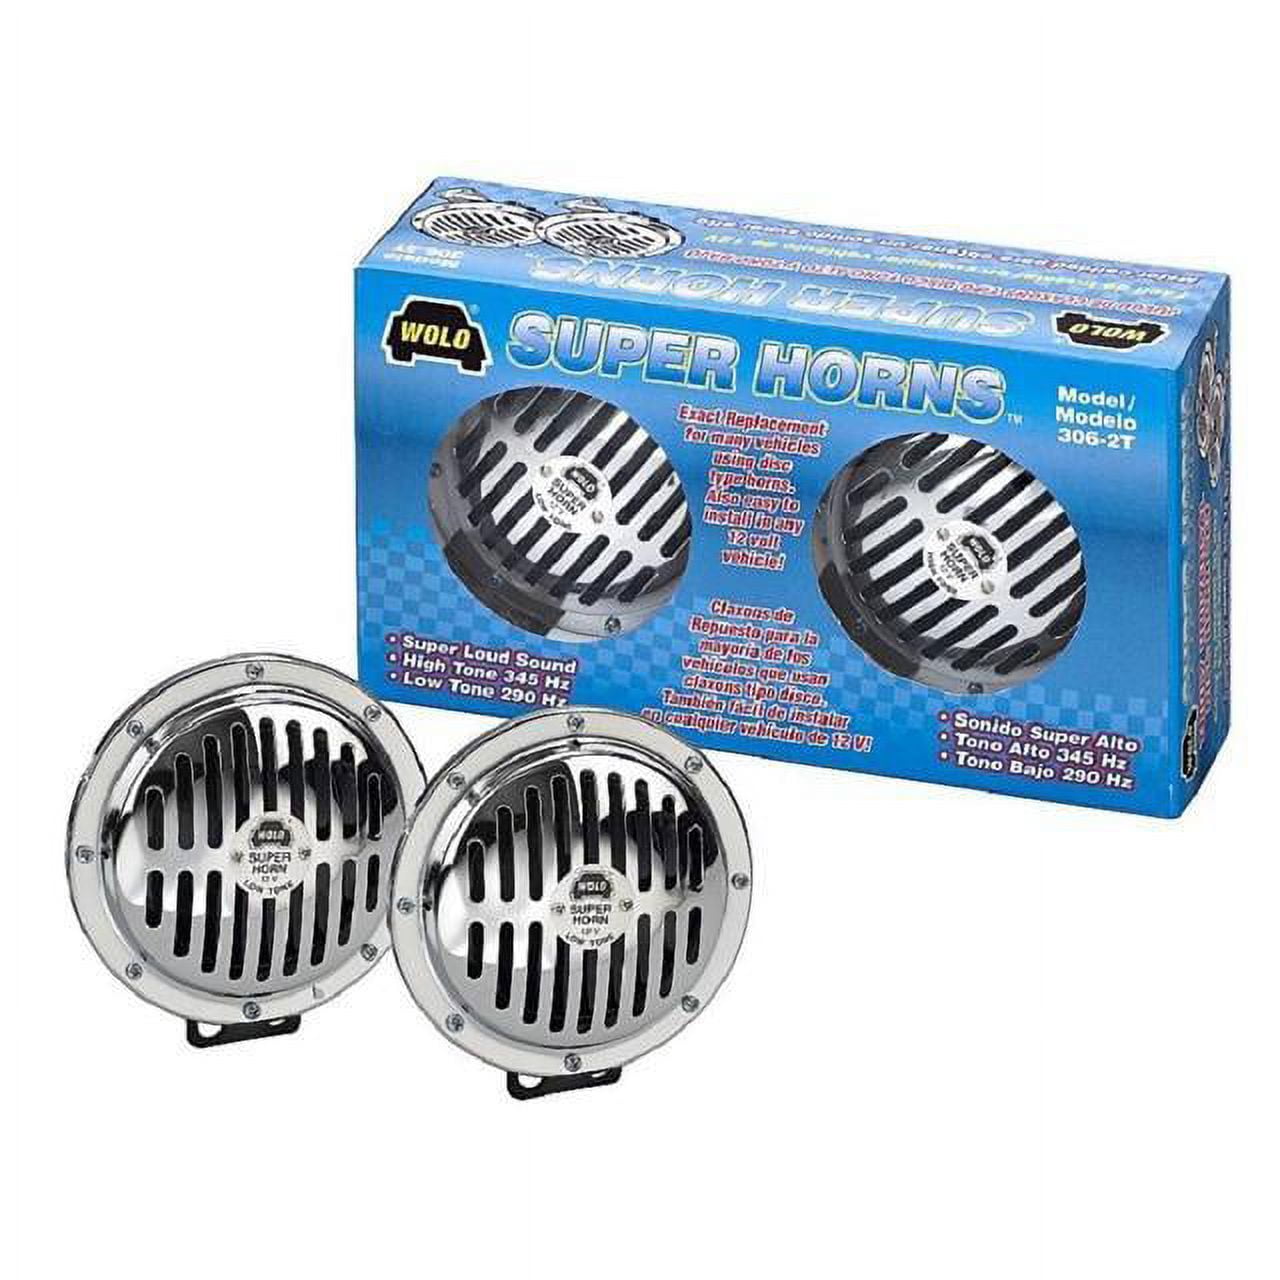 Wolo 306-2T Electric Horn Super Horn- Two (2) 6 Disc Horns Extra Loud,  Chrome Grill, Two (2) Terminal 12-Volt